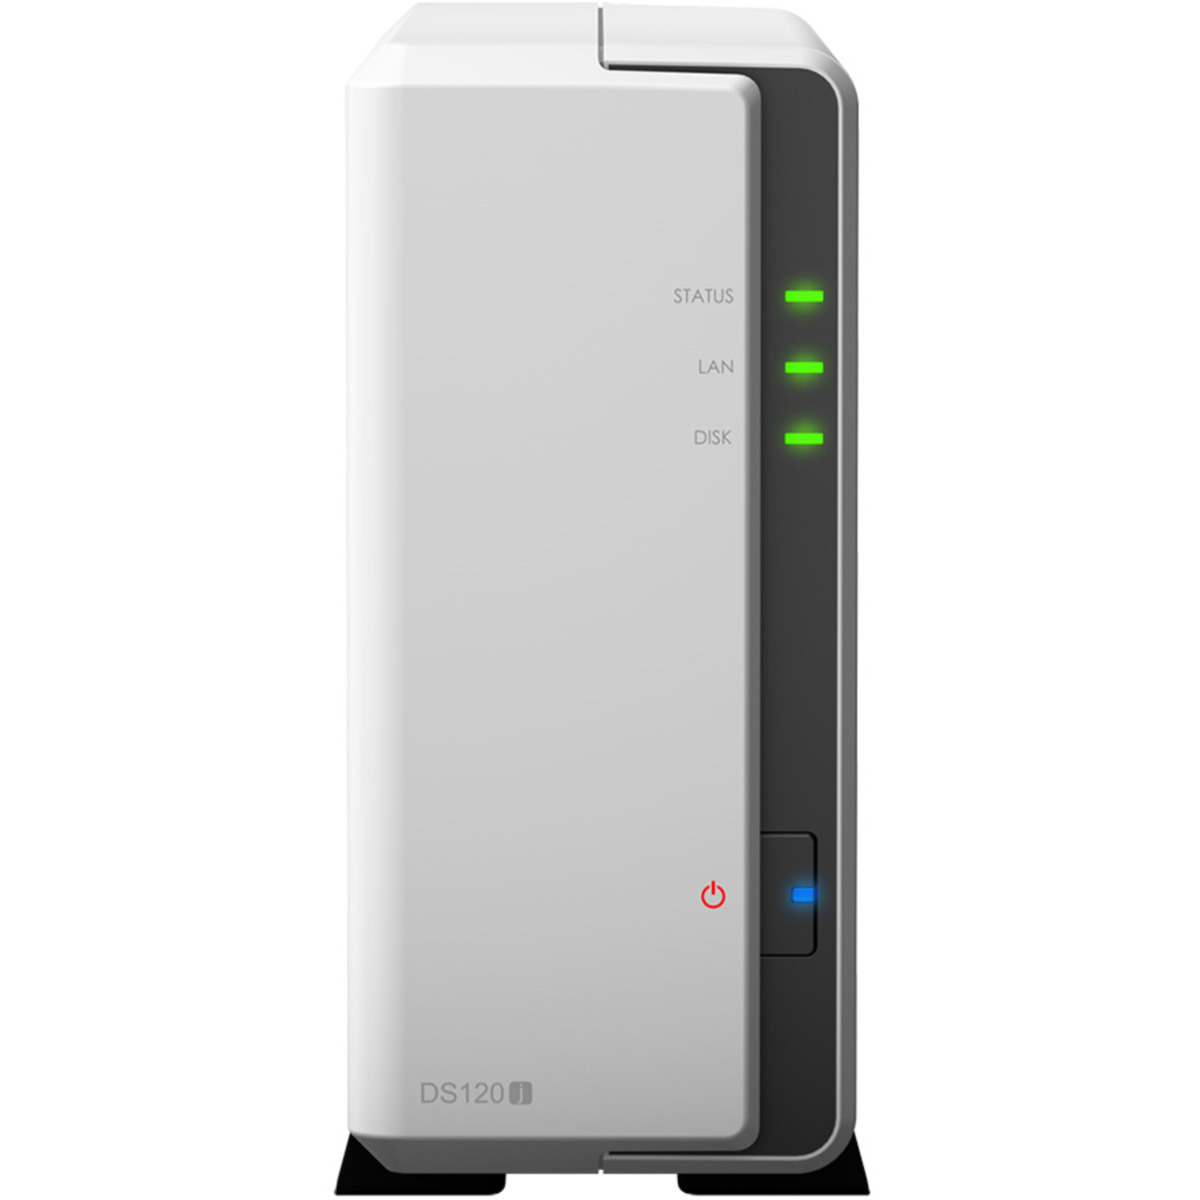 buy $576 Synology DiskStation DS120j 18tb Desktop NAS - Network Attached Storage Device 1x18000gb Toshiba Enterprise Capacity MG09ACA18TE 3.5 7200rpm SATA 6Gb/s HDD ENTERPRISE Class Drives Installed - Burn-In Tested - nas headquarters buy network attached storage server device das new raid-5 free shipping usa christmas new year holiday sale DiskStation DS120j